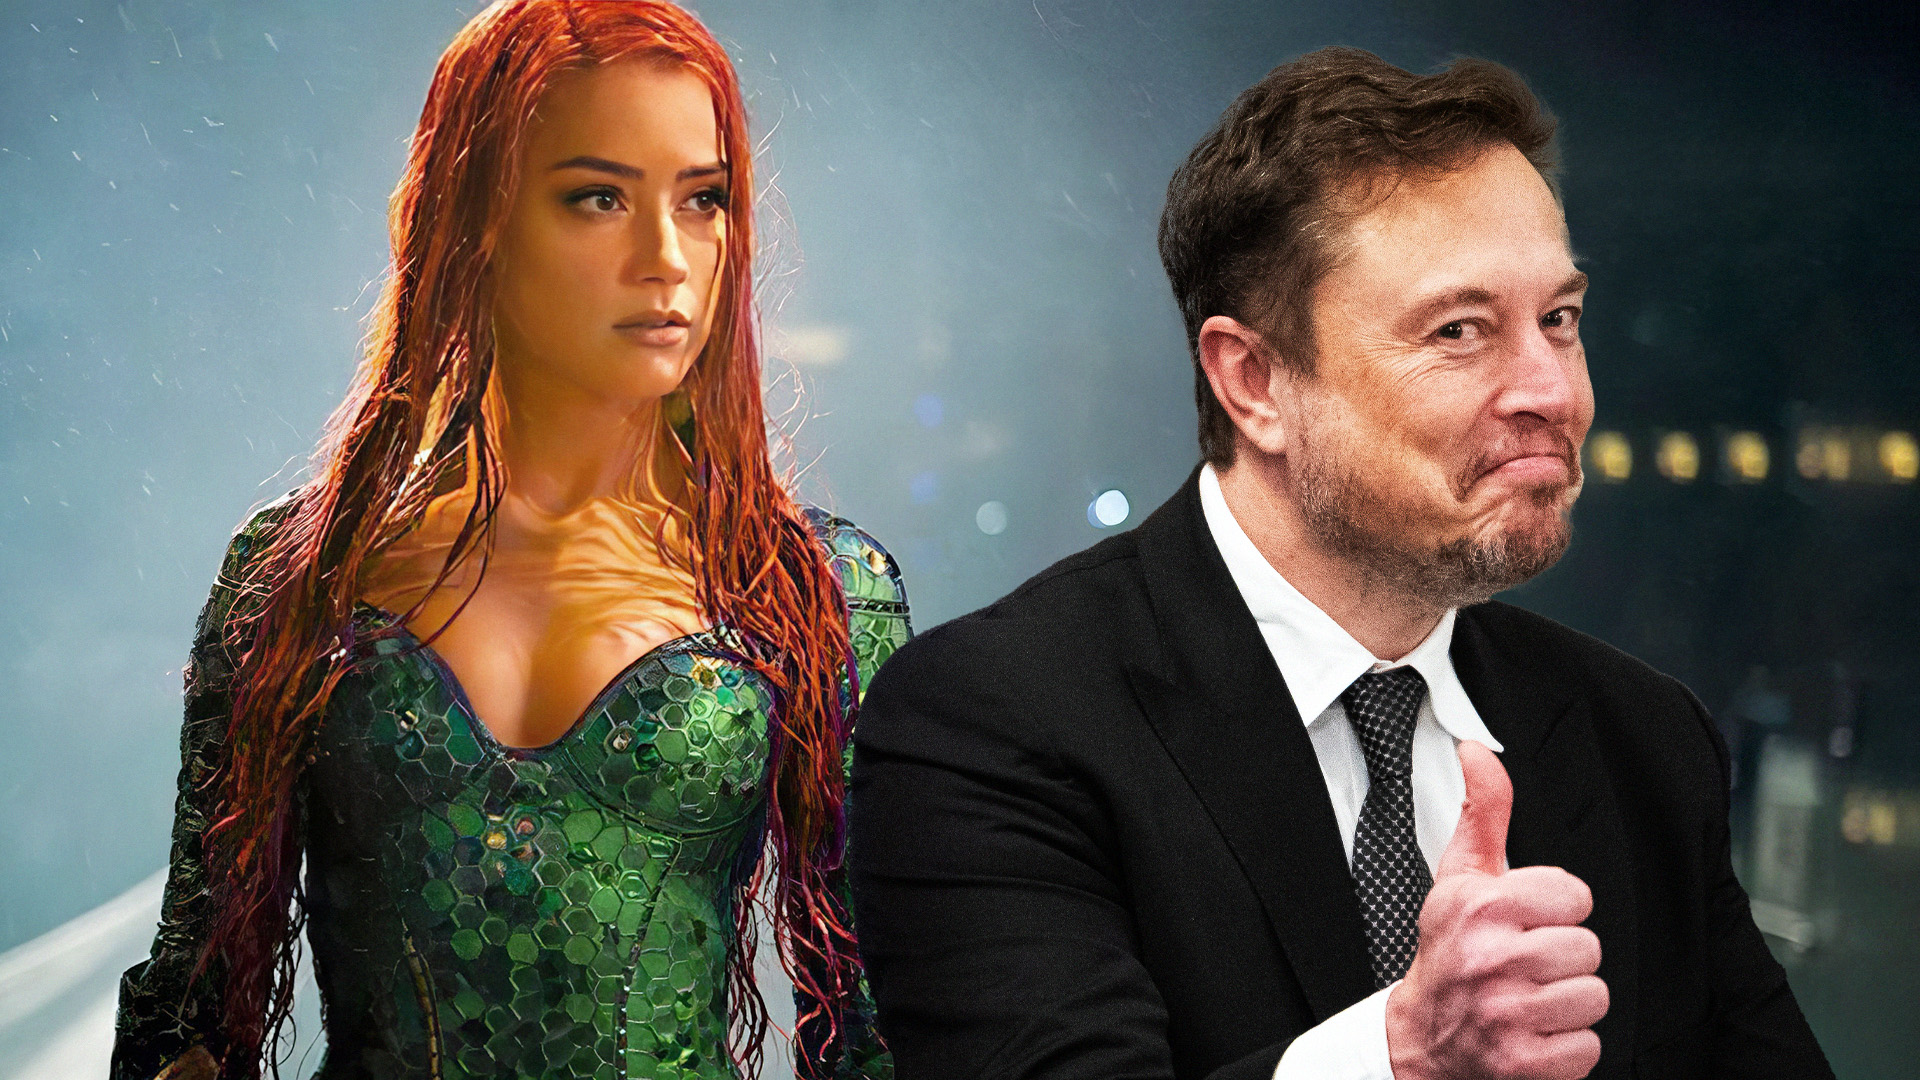 Amber Heard Has Elon Musk to Thank for Aquaman 2 Role, Apparently